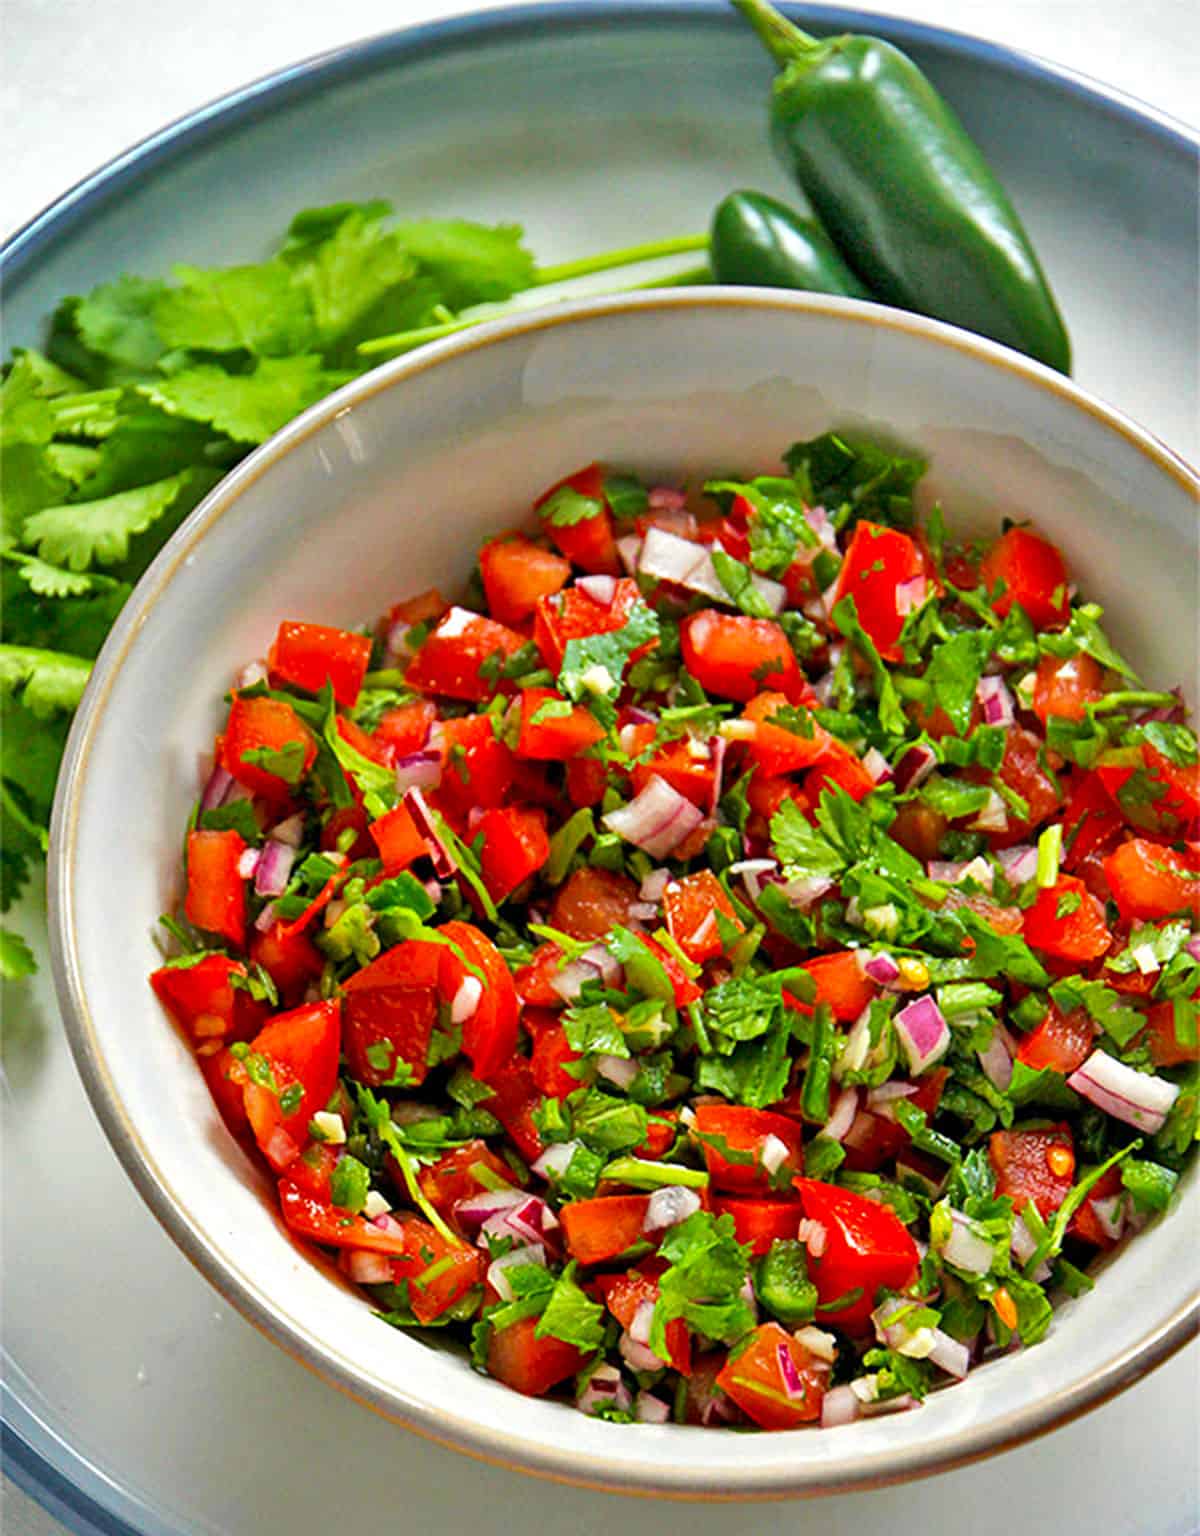 Pico de gallo with tomatoes, cilantro, onions, and jalapenos in a bowl.